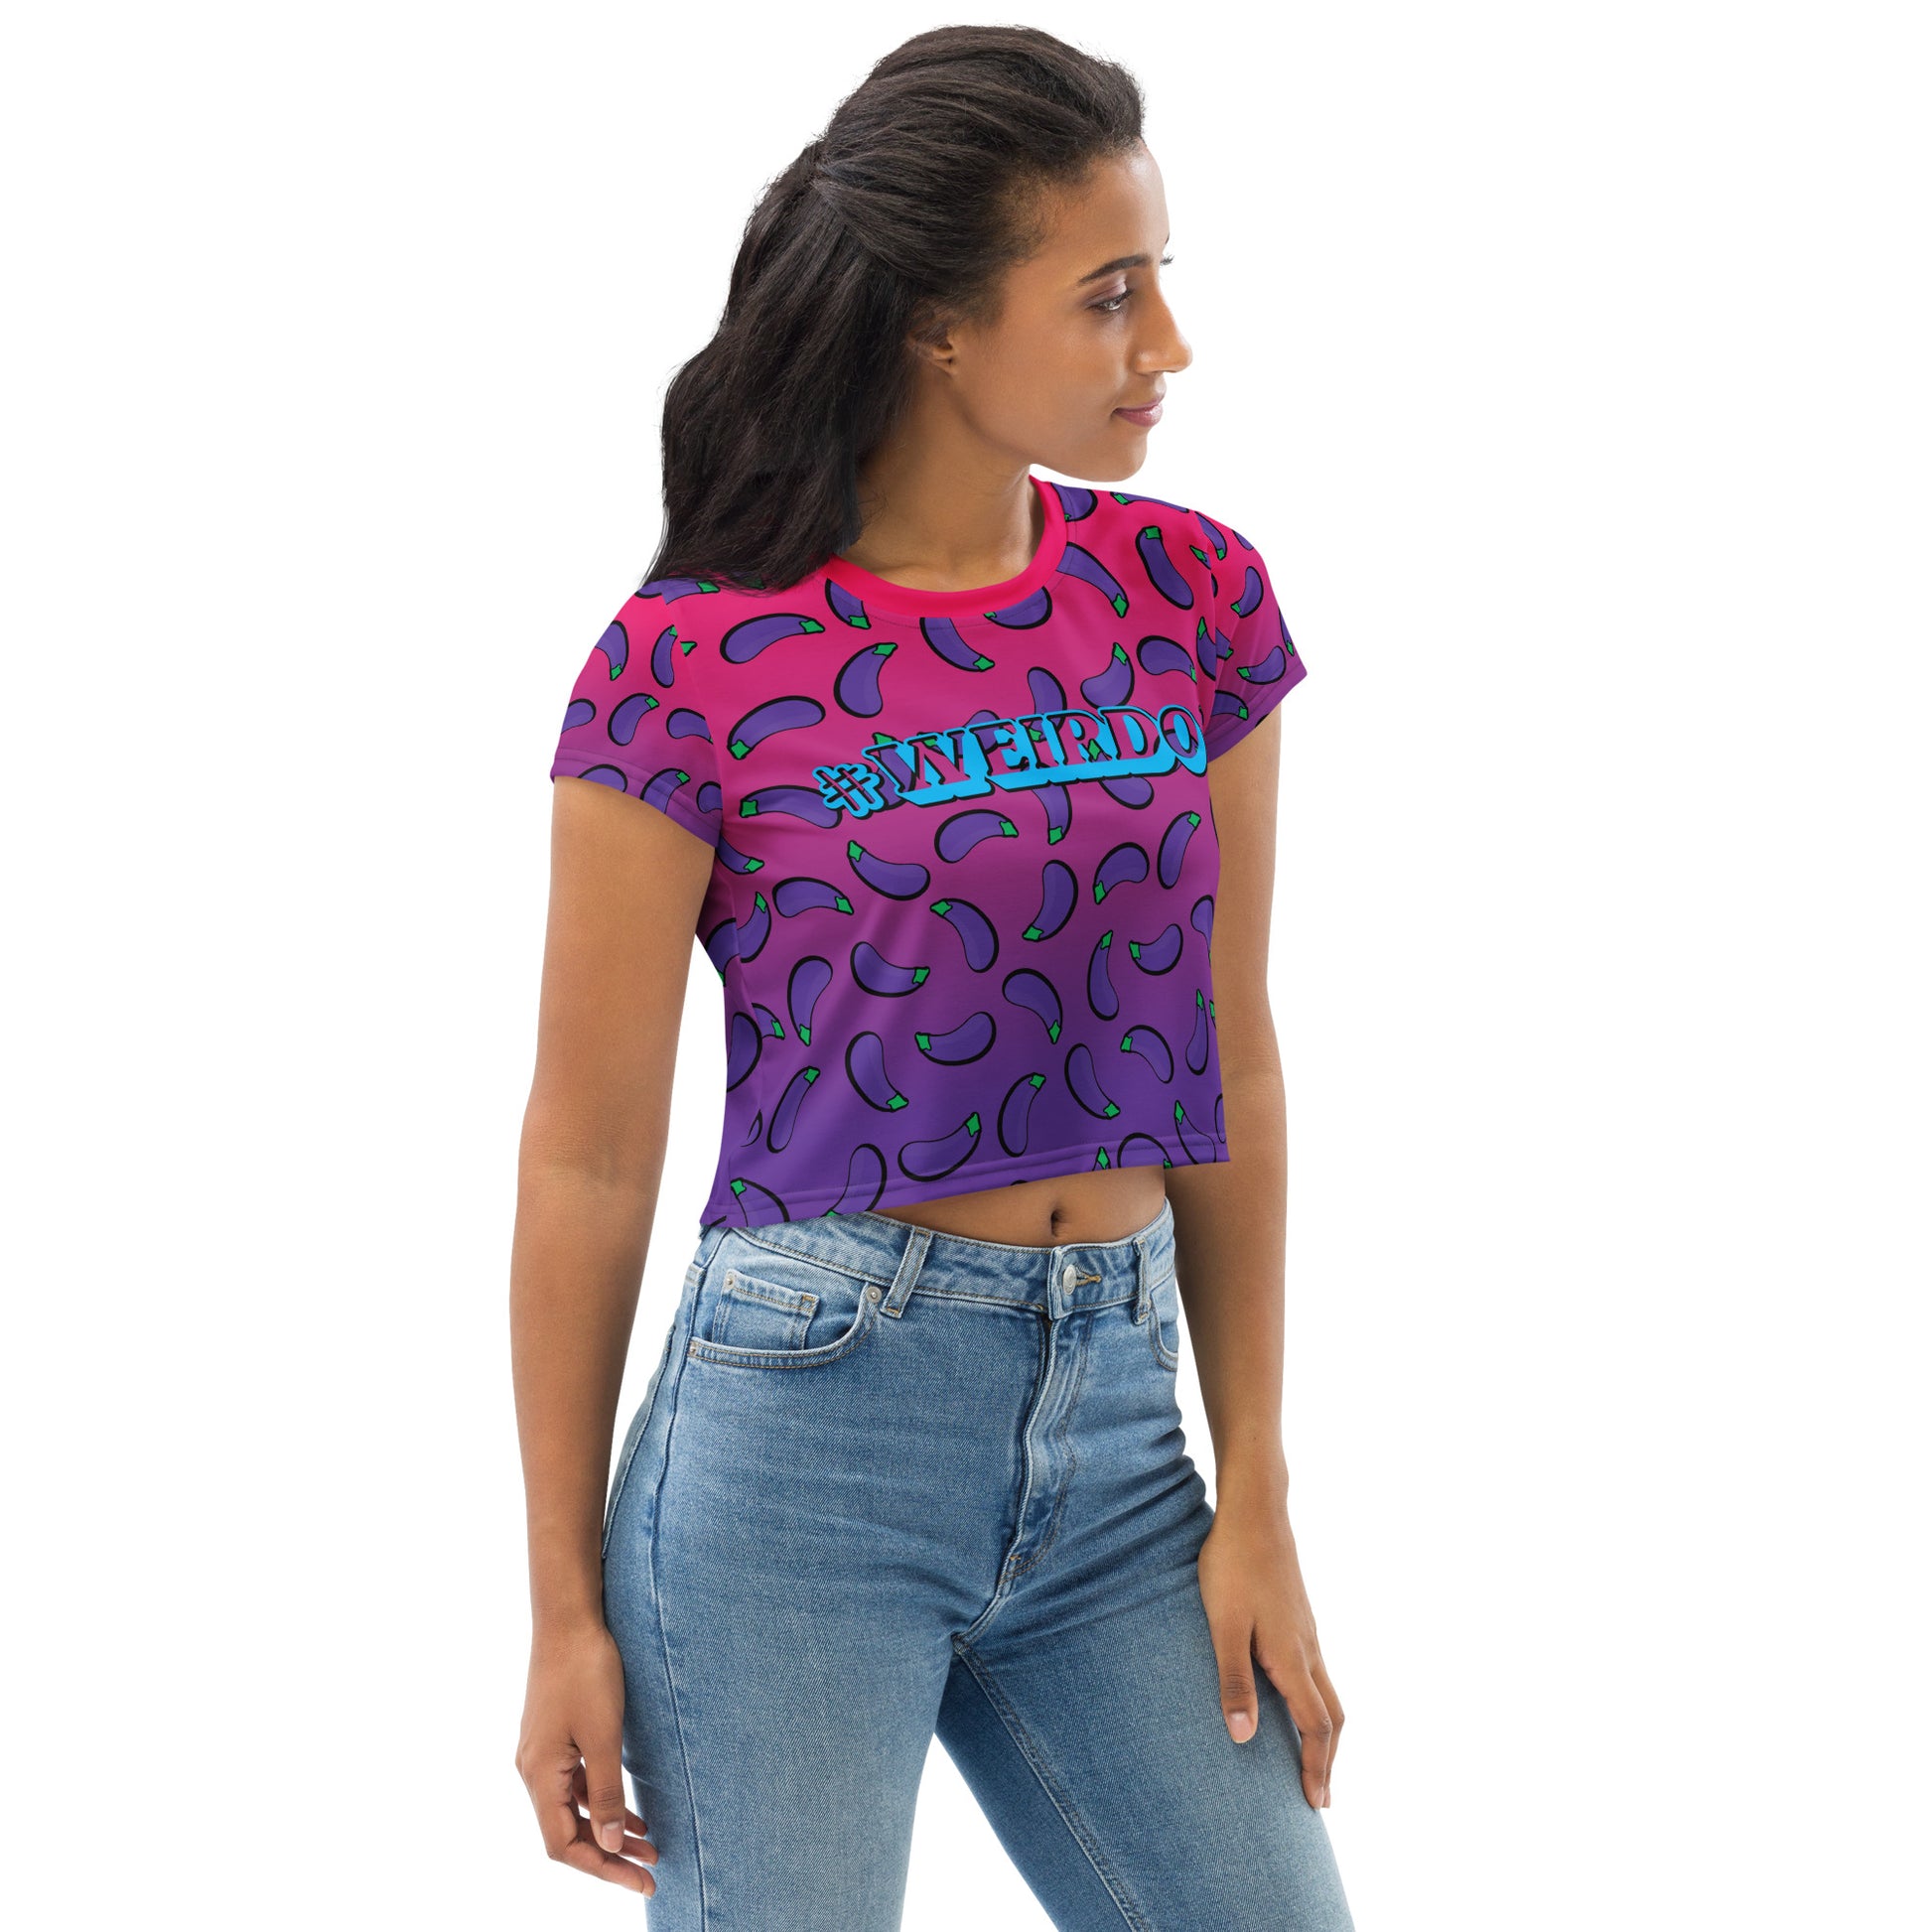 #WEIRDO | If you’re looking for funny t shirts for woman, this is your favorite funny t shirt company! This crop tee is definitely weird with the eggplants printed all over the tee. Our #WEIRDO meme is printed at the centre of the crop tee.